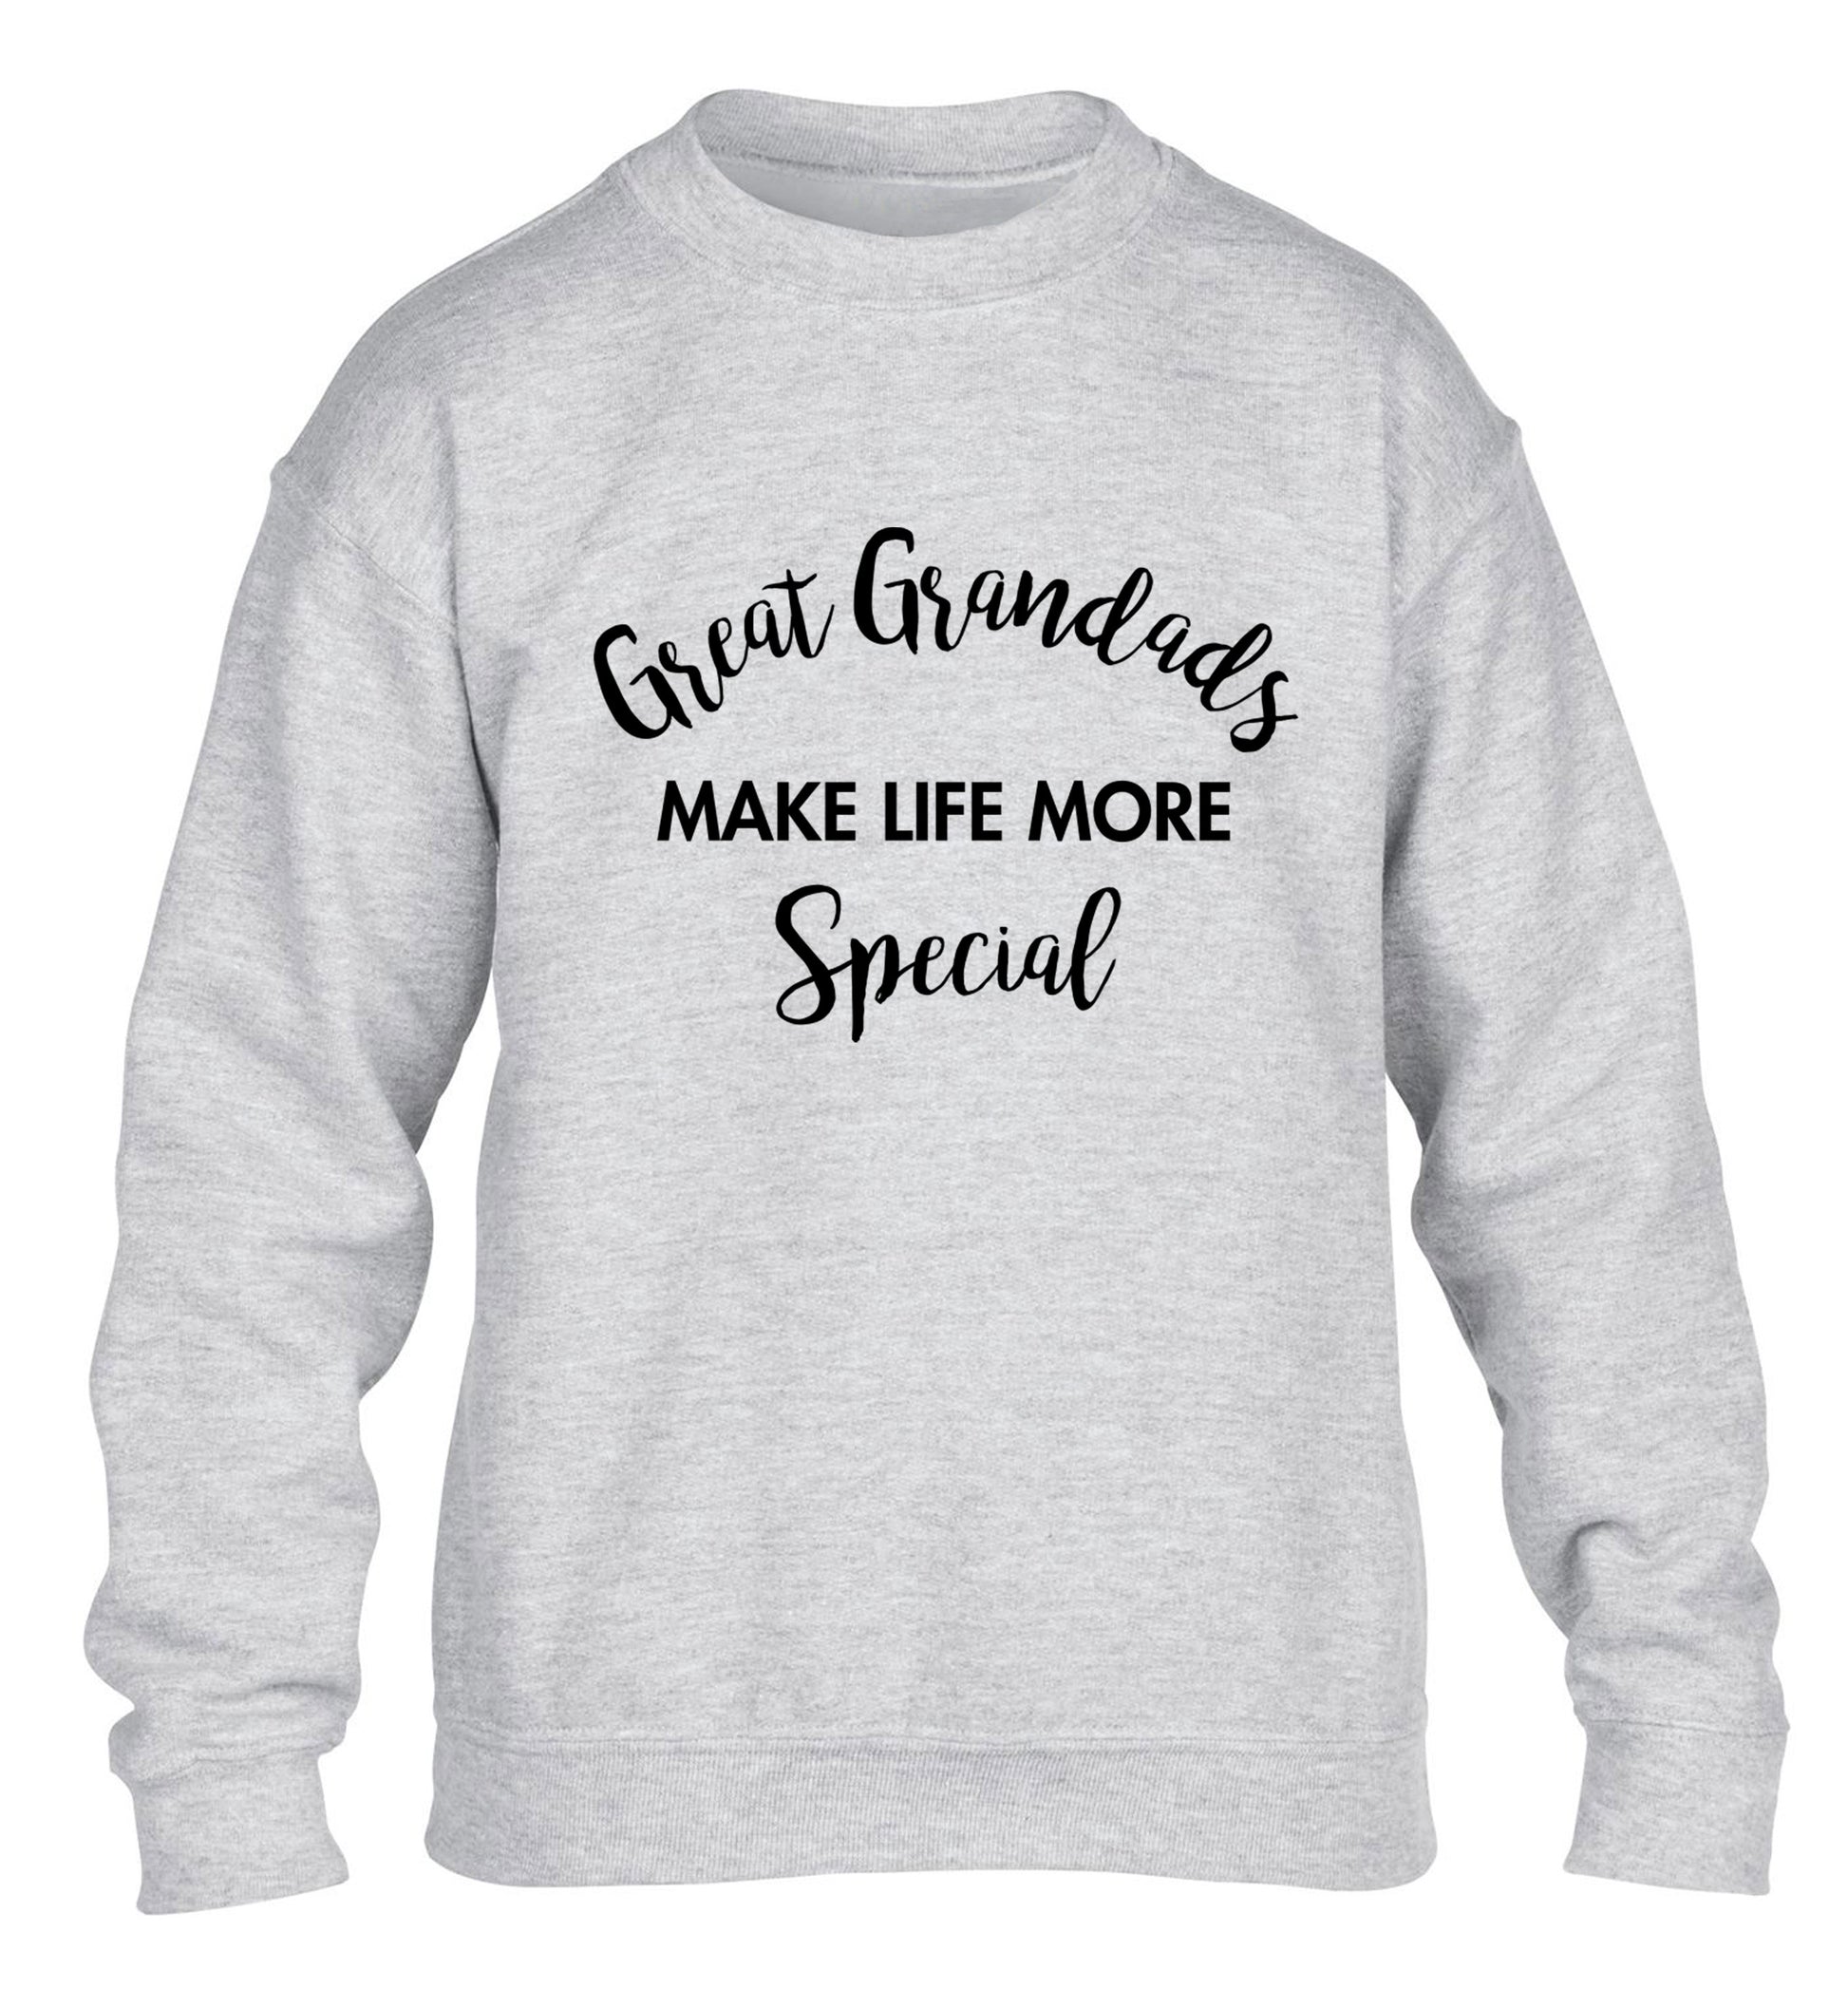 Great Grandads make life more special children's grey sweater 12-14 Years